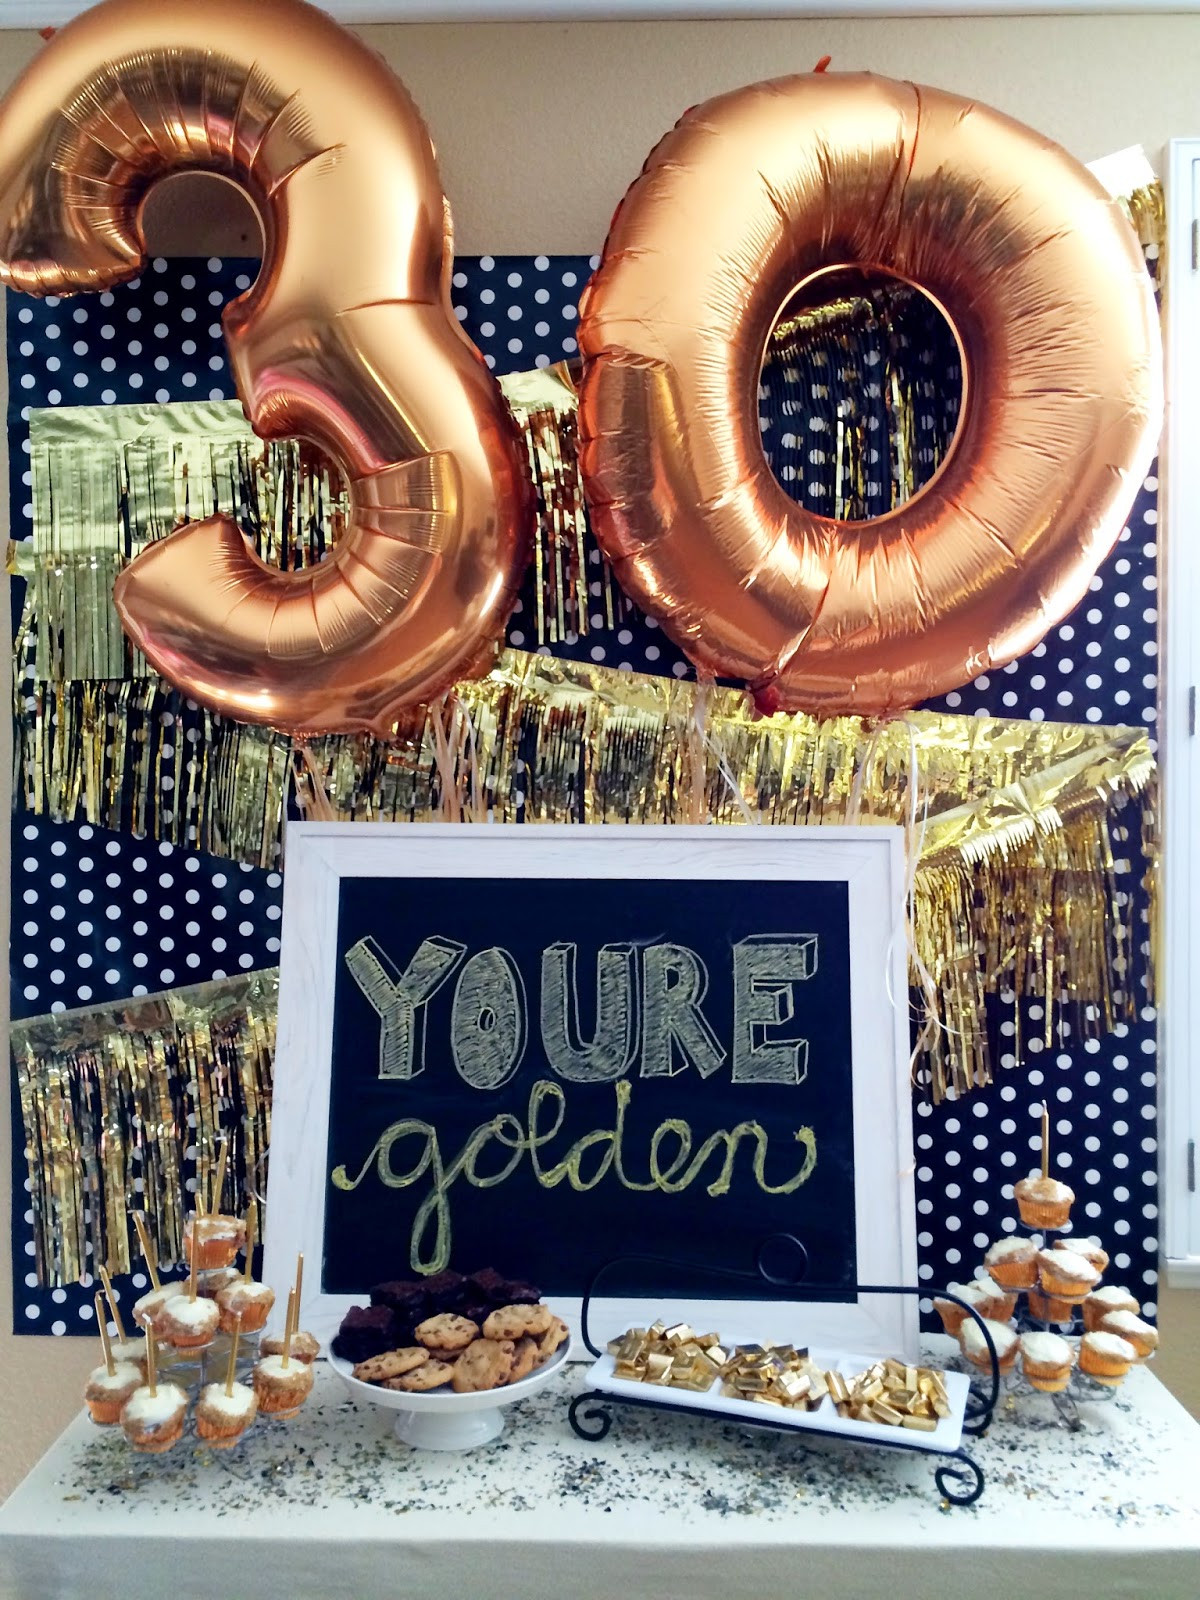 Golden Birthday Party Ideas
 7 Clever Themes for a Smashing 30th Birthday Party